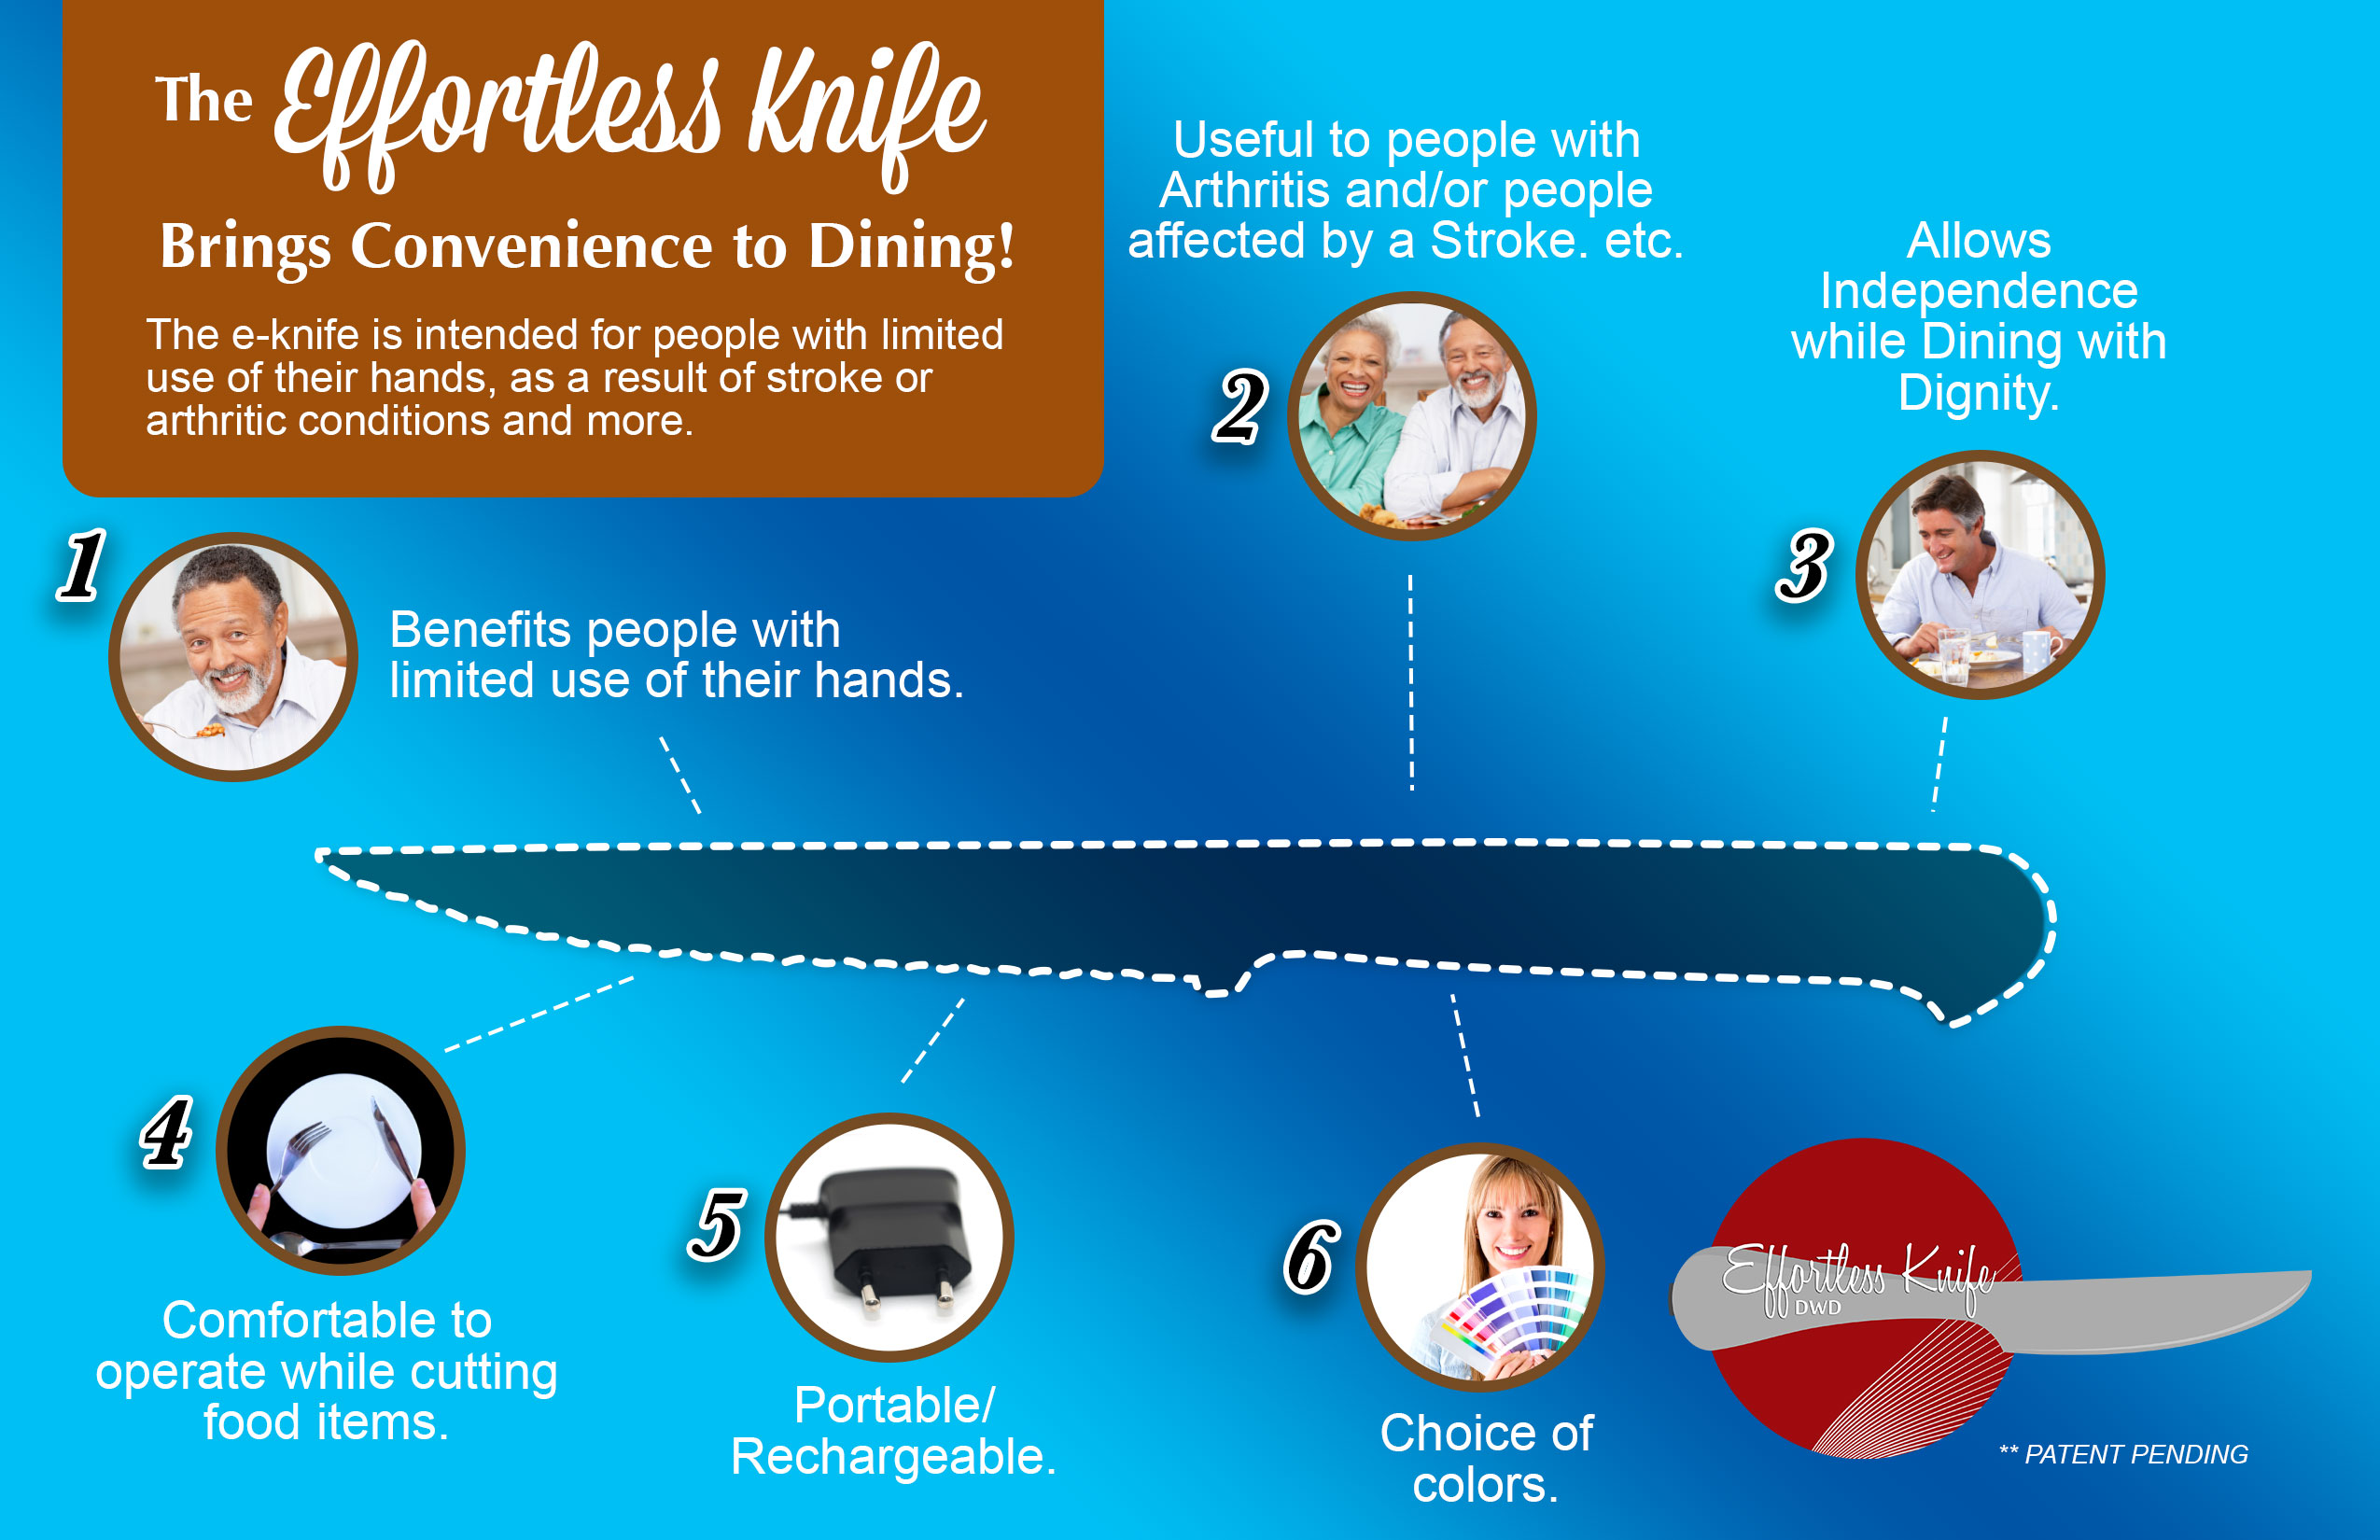 The many benefits of using the Effortless Knife!